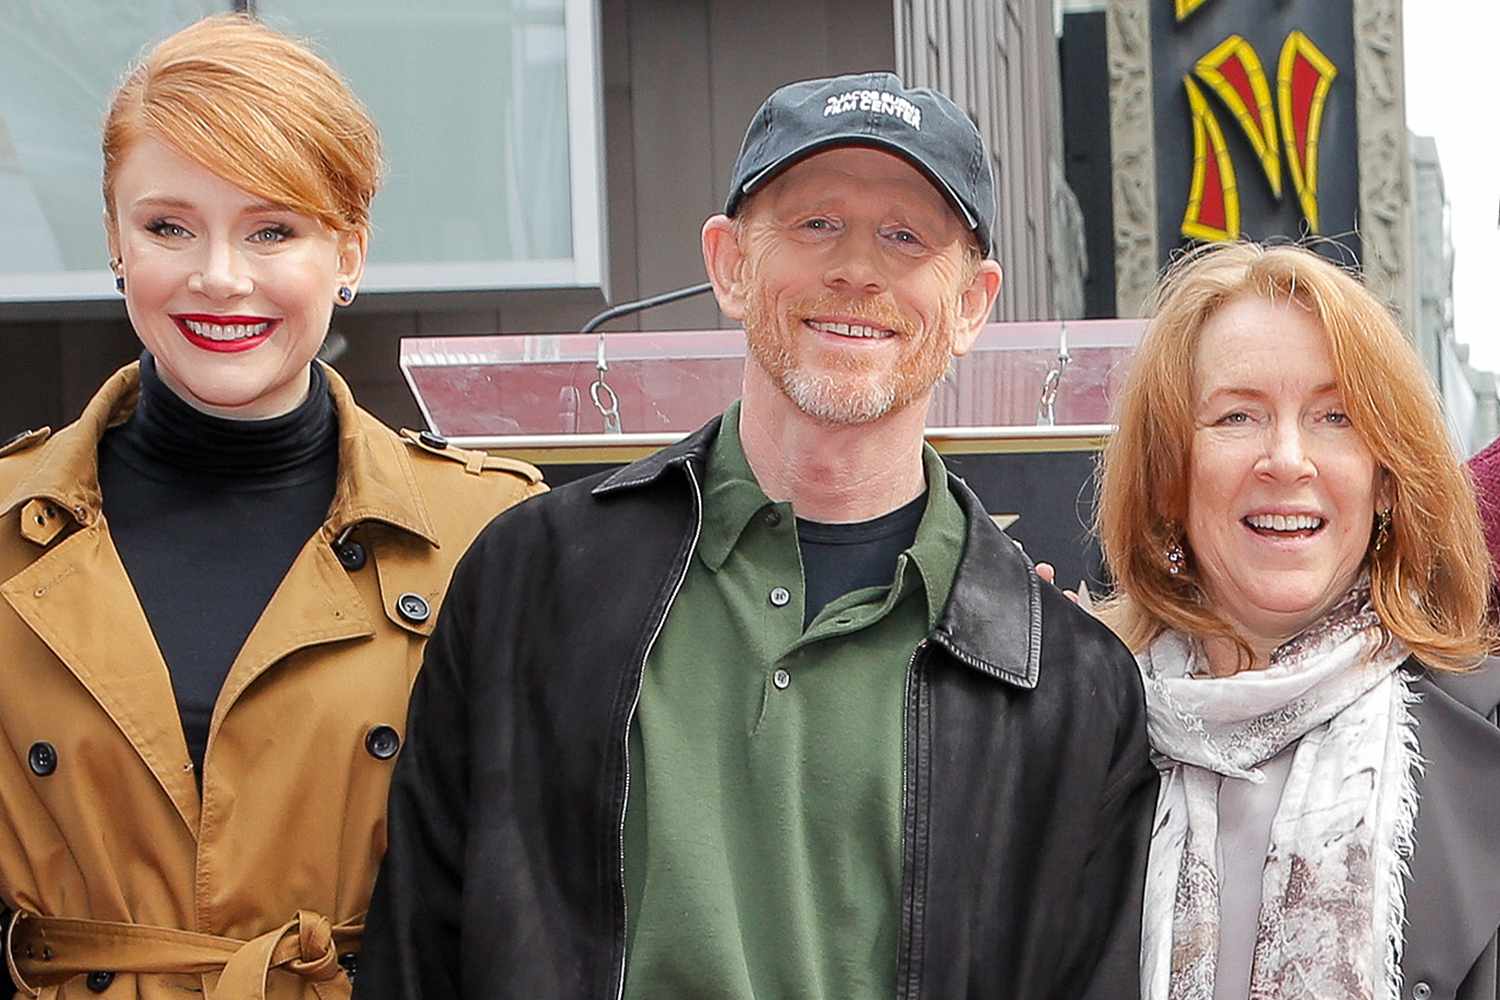 Ron Howard Shares Why Wife Cheryl Isn't Impressed by Daughter Bryce Dallas' Ability to Cry on Command